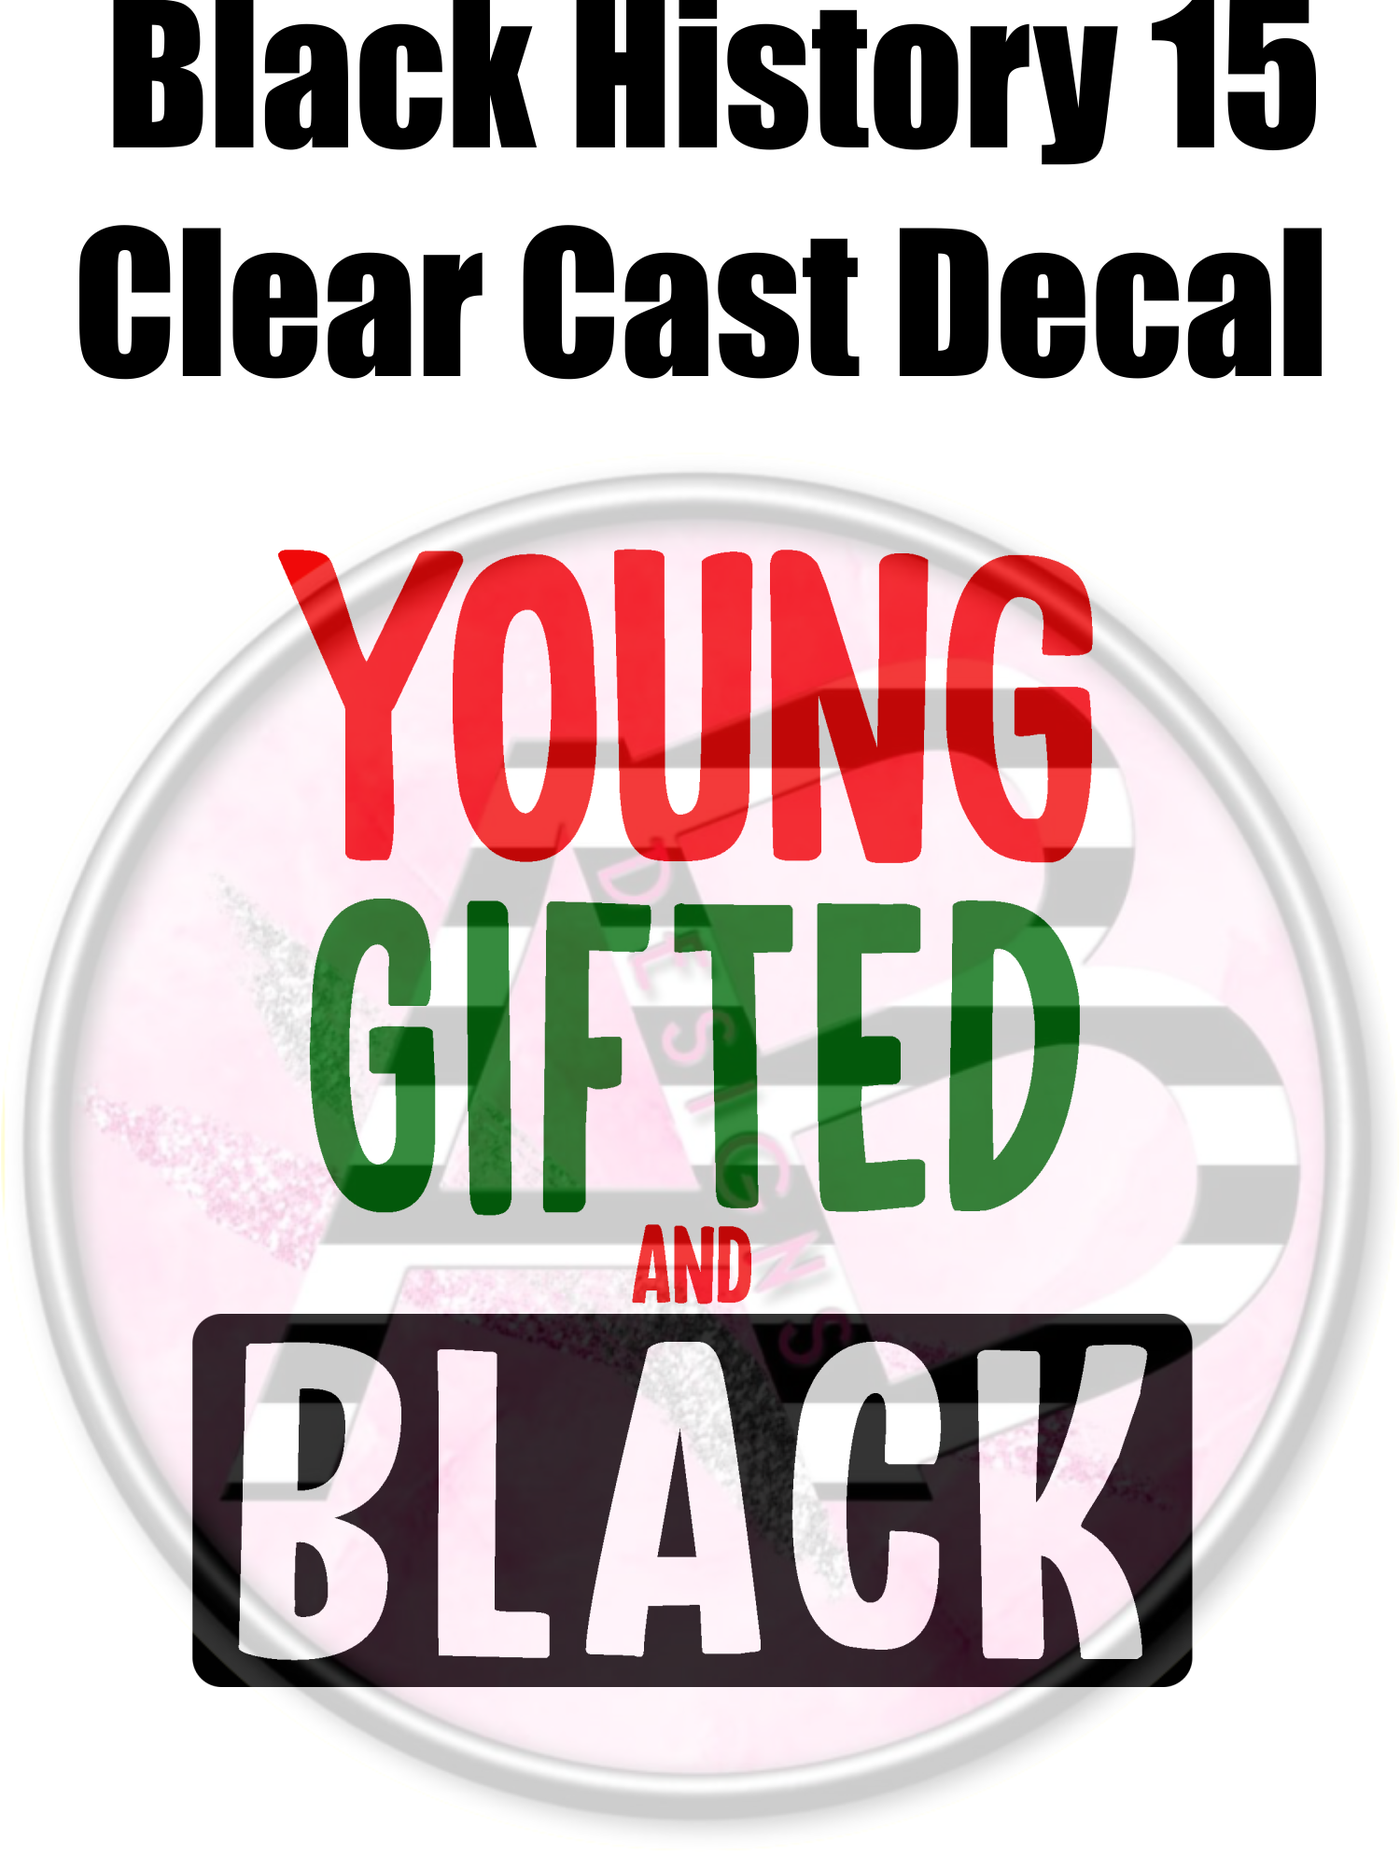 Black History 15 - Clear Cast Decal